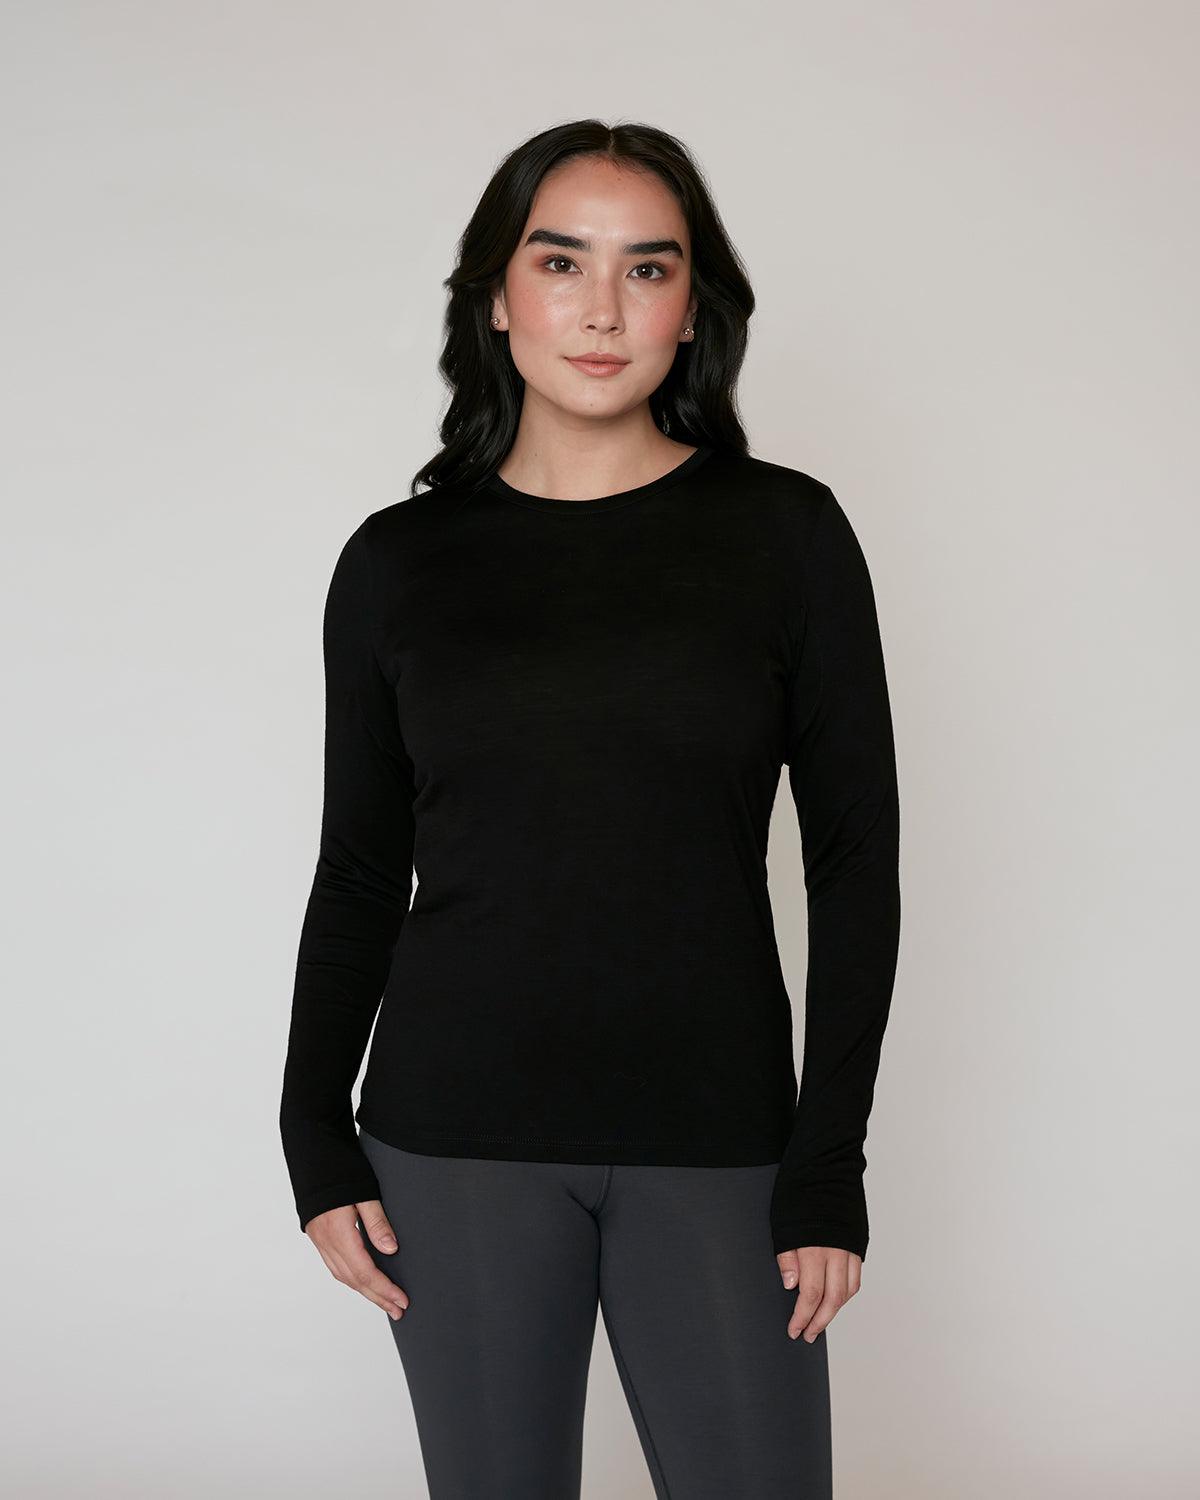 "#color_BLACK| Emi is 5'7.5", wearing a size S